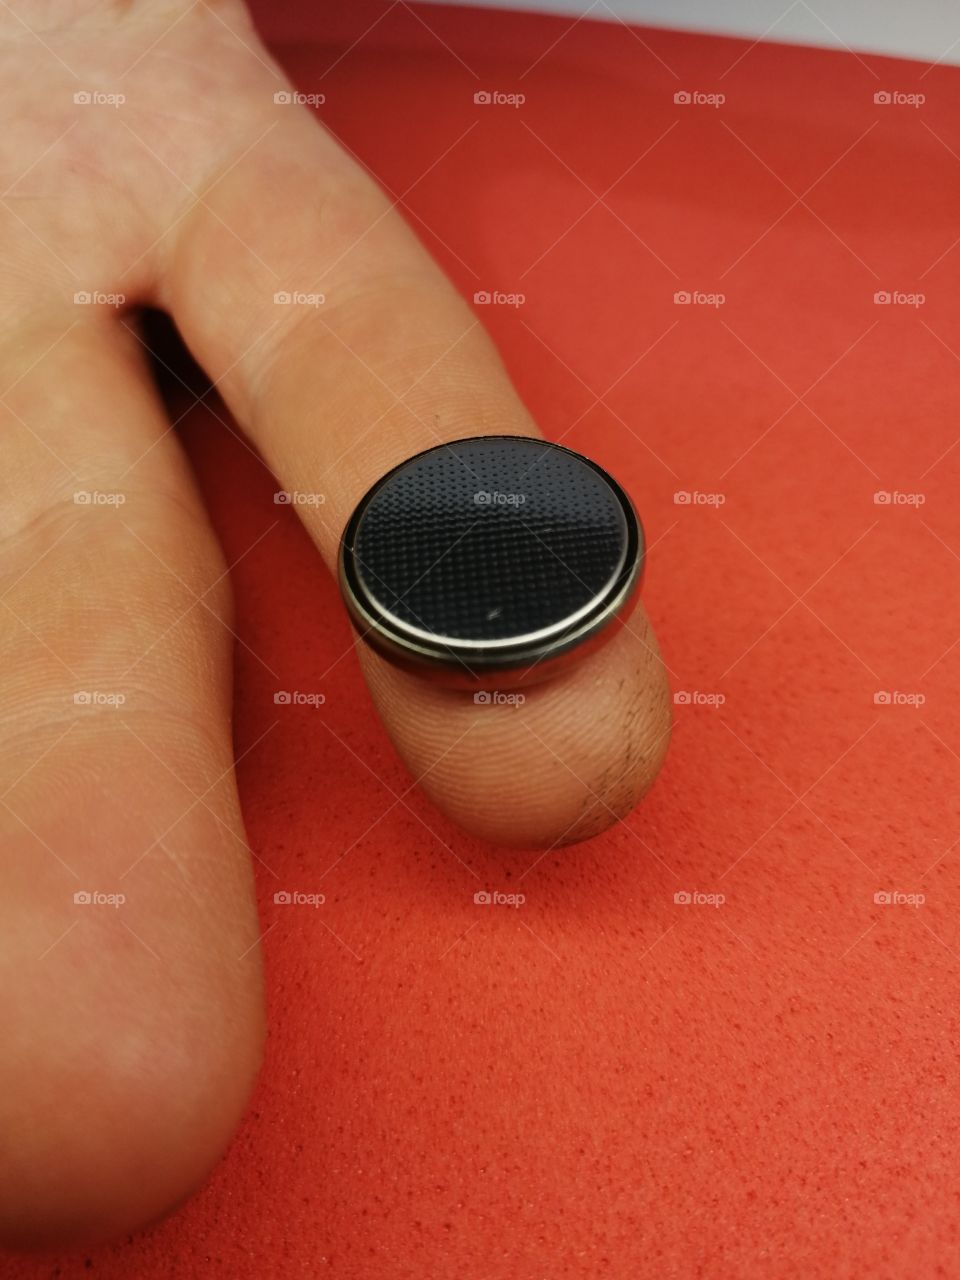 small new finger-type battery on a red background close-up